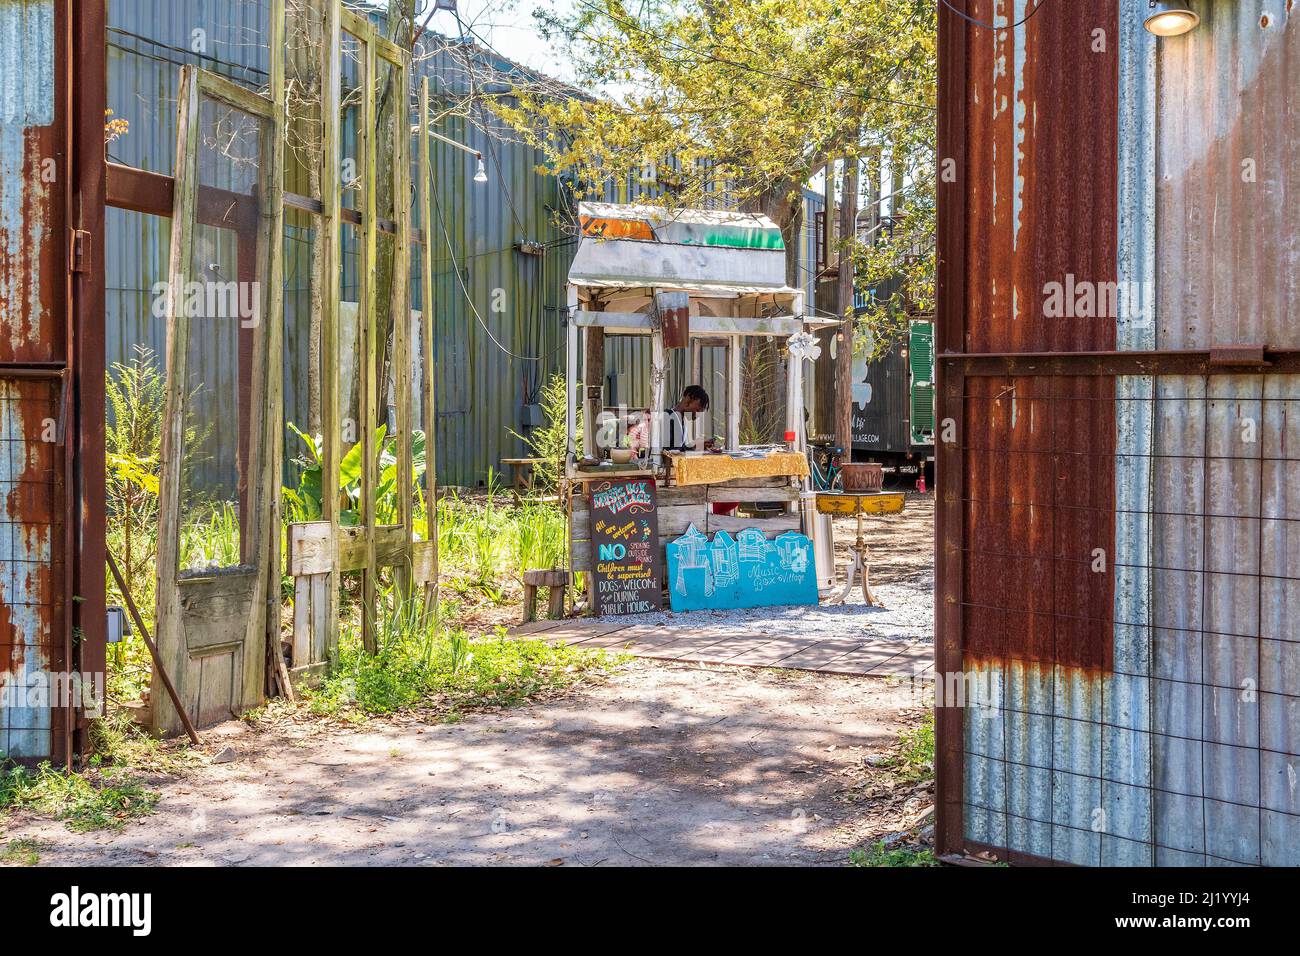 The Music Box Village art and music performance site entrance in the Bywater neighborhood of New Orleans, Louisiana, USA. Stock Photo